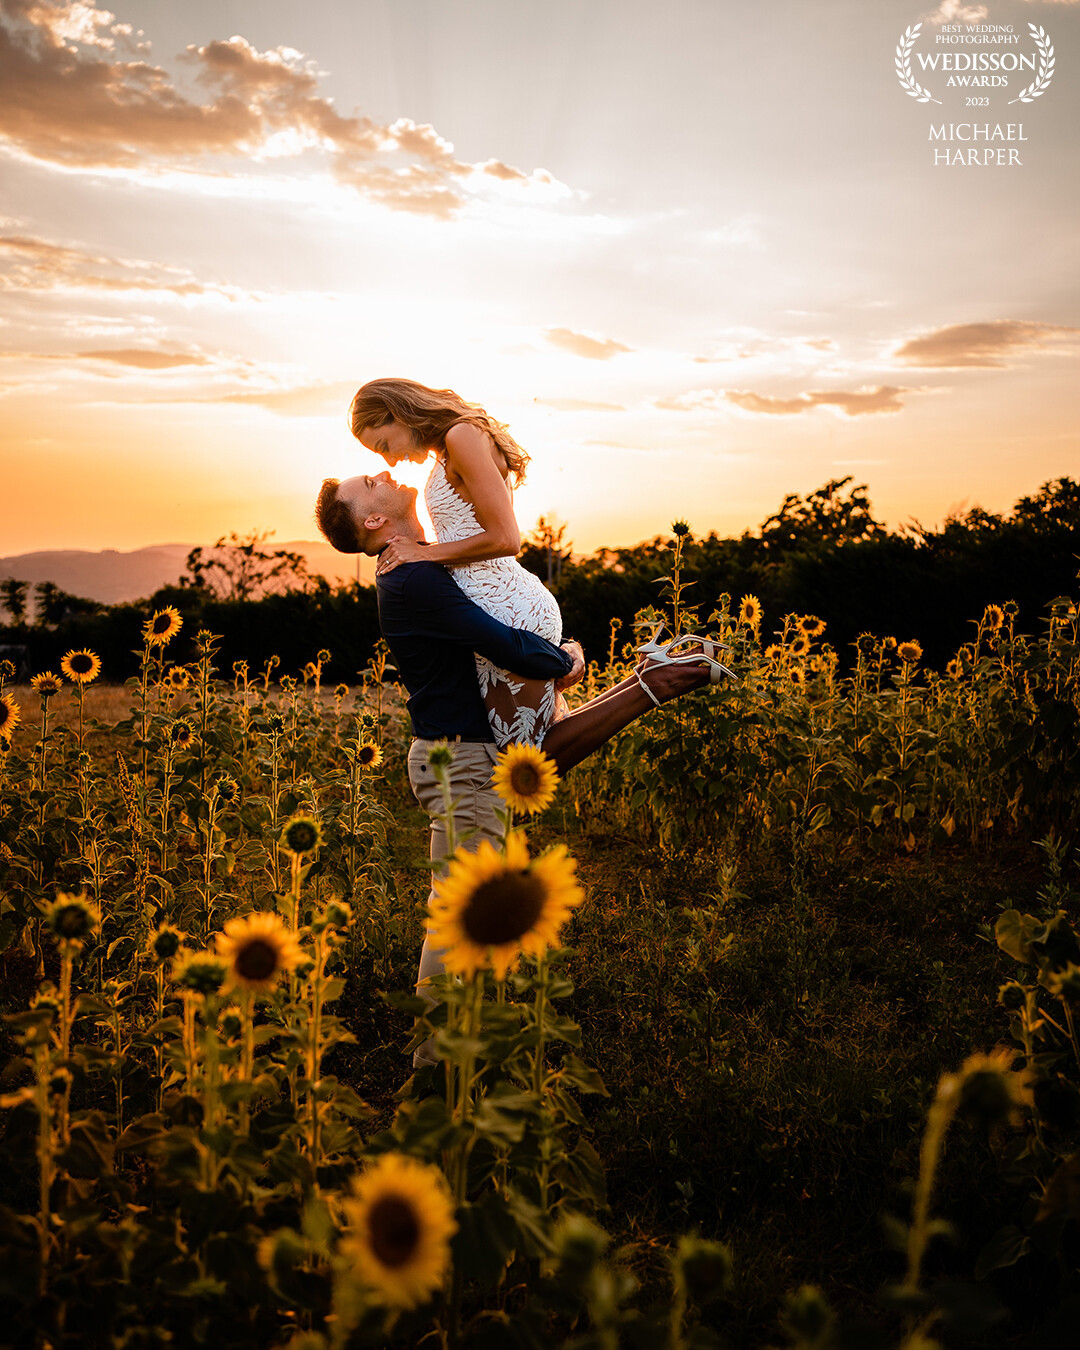 In the rolling hills of Tuscany the day before the wedding, we found a patch of sunflowers which was the perfect end to the pre-wedding shoot. As the sunset, the groom lifted the bride-to-be in the air and created this moment.